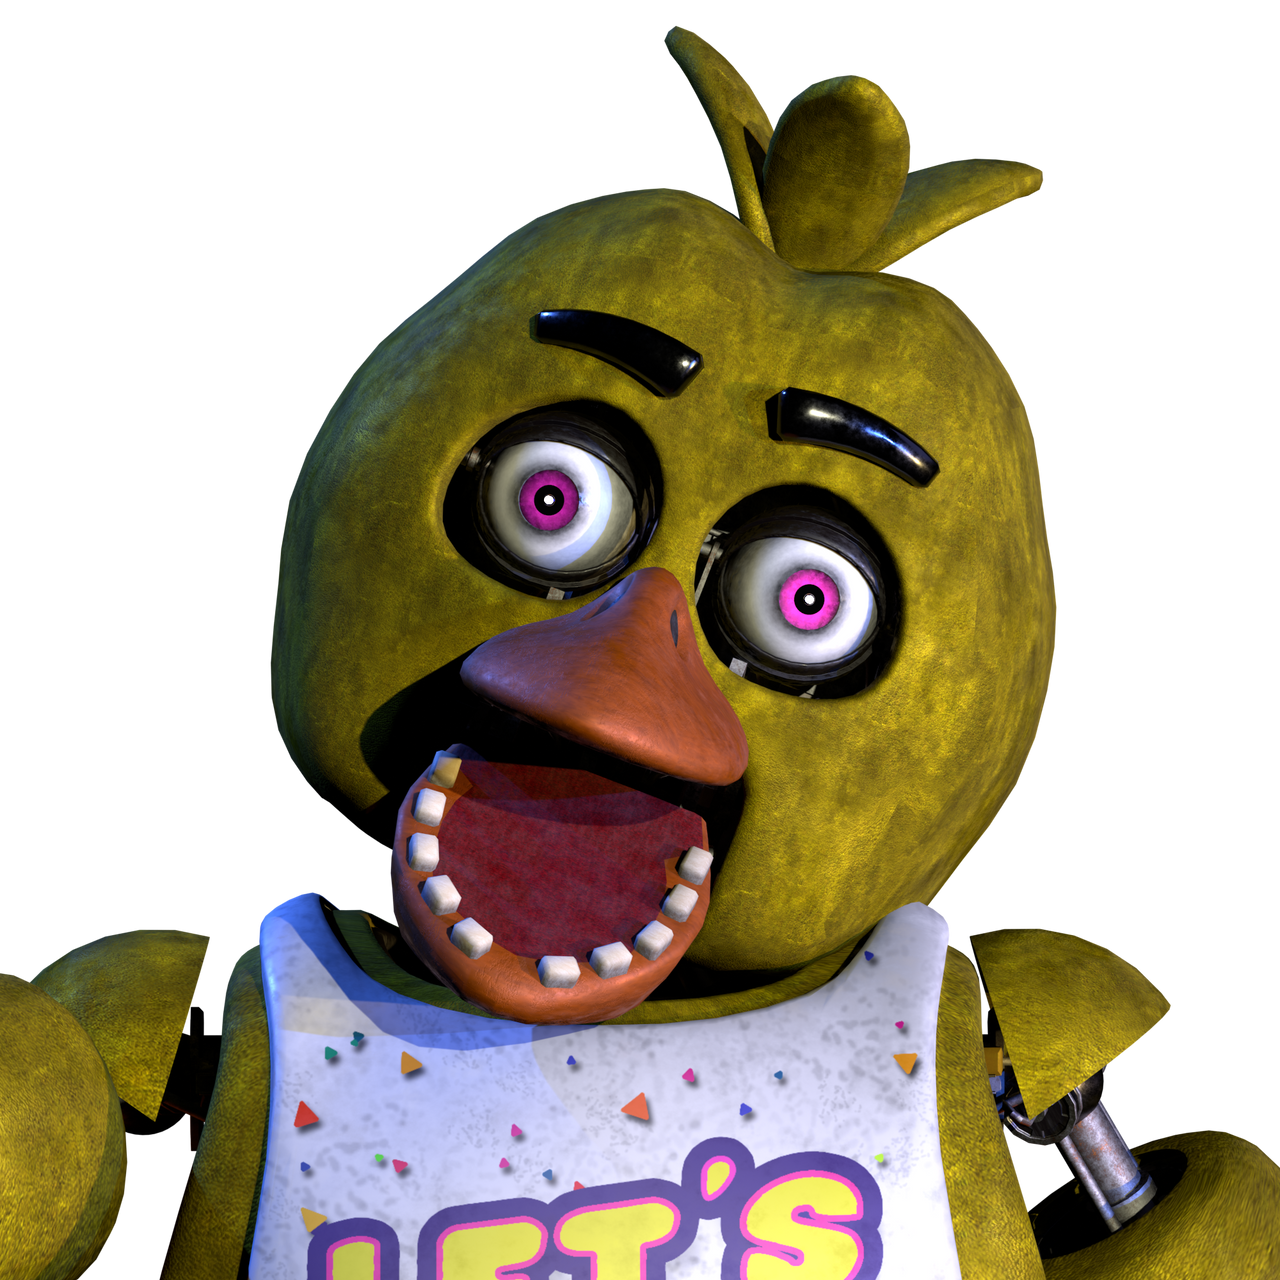 Withered Chica Character Render by TheUnbearable101 on DeviantArt